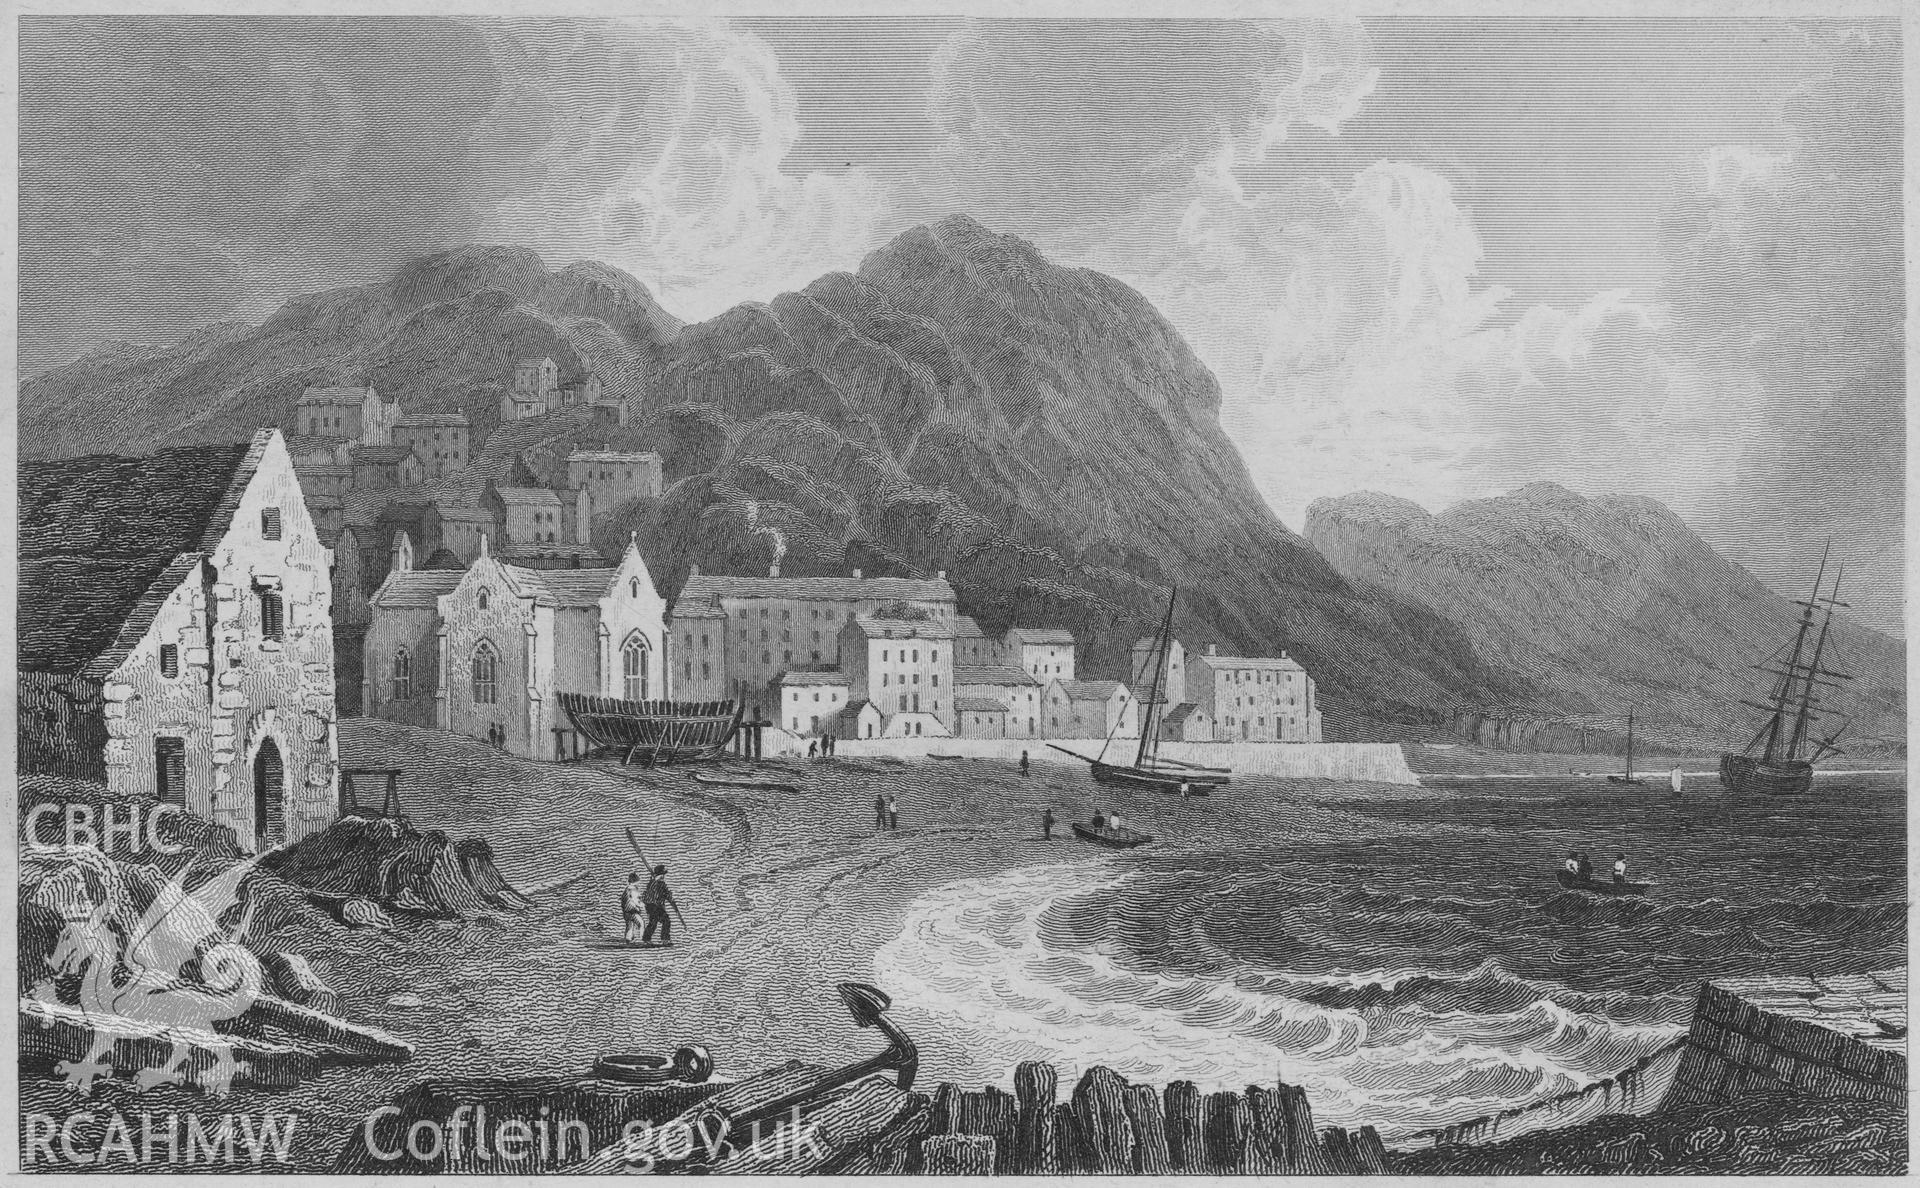 Digital copy of an early engraving of Barmouth/Abermaw.